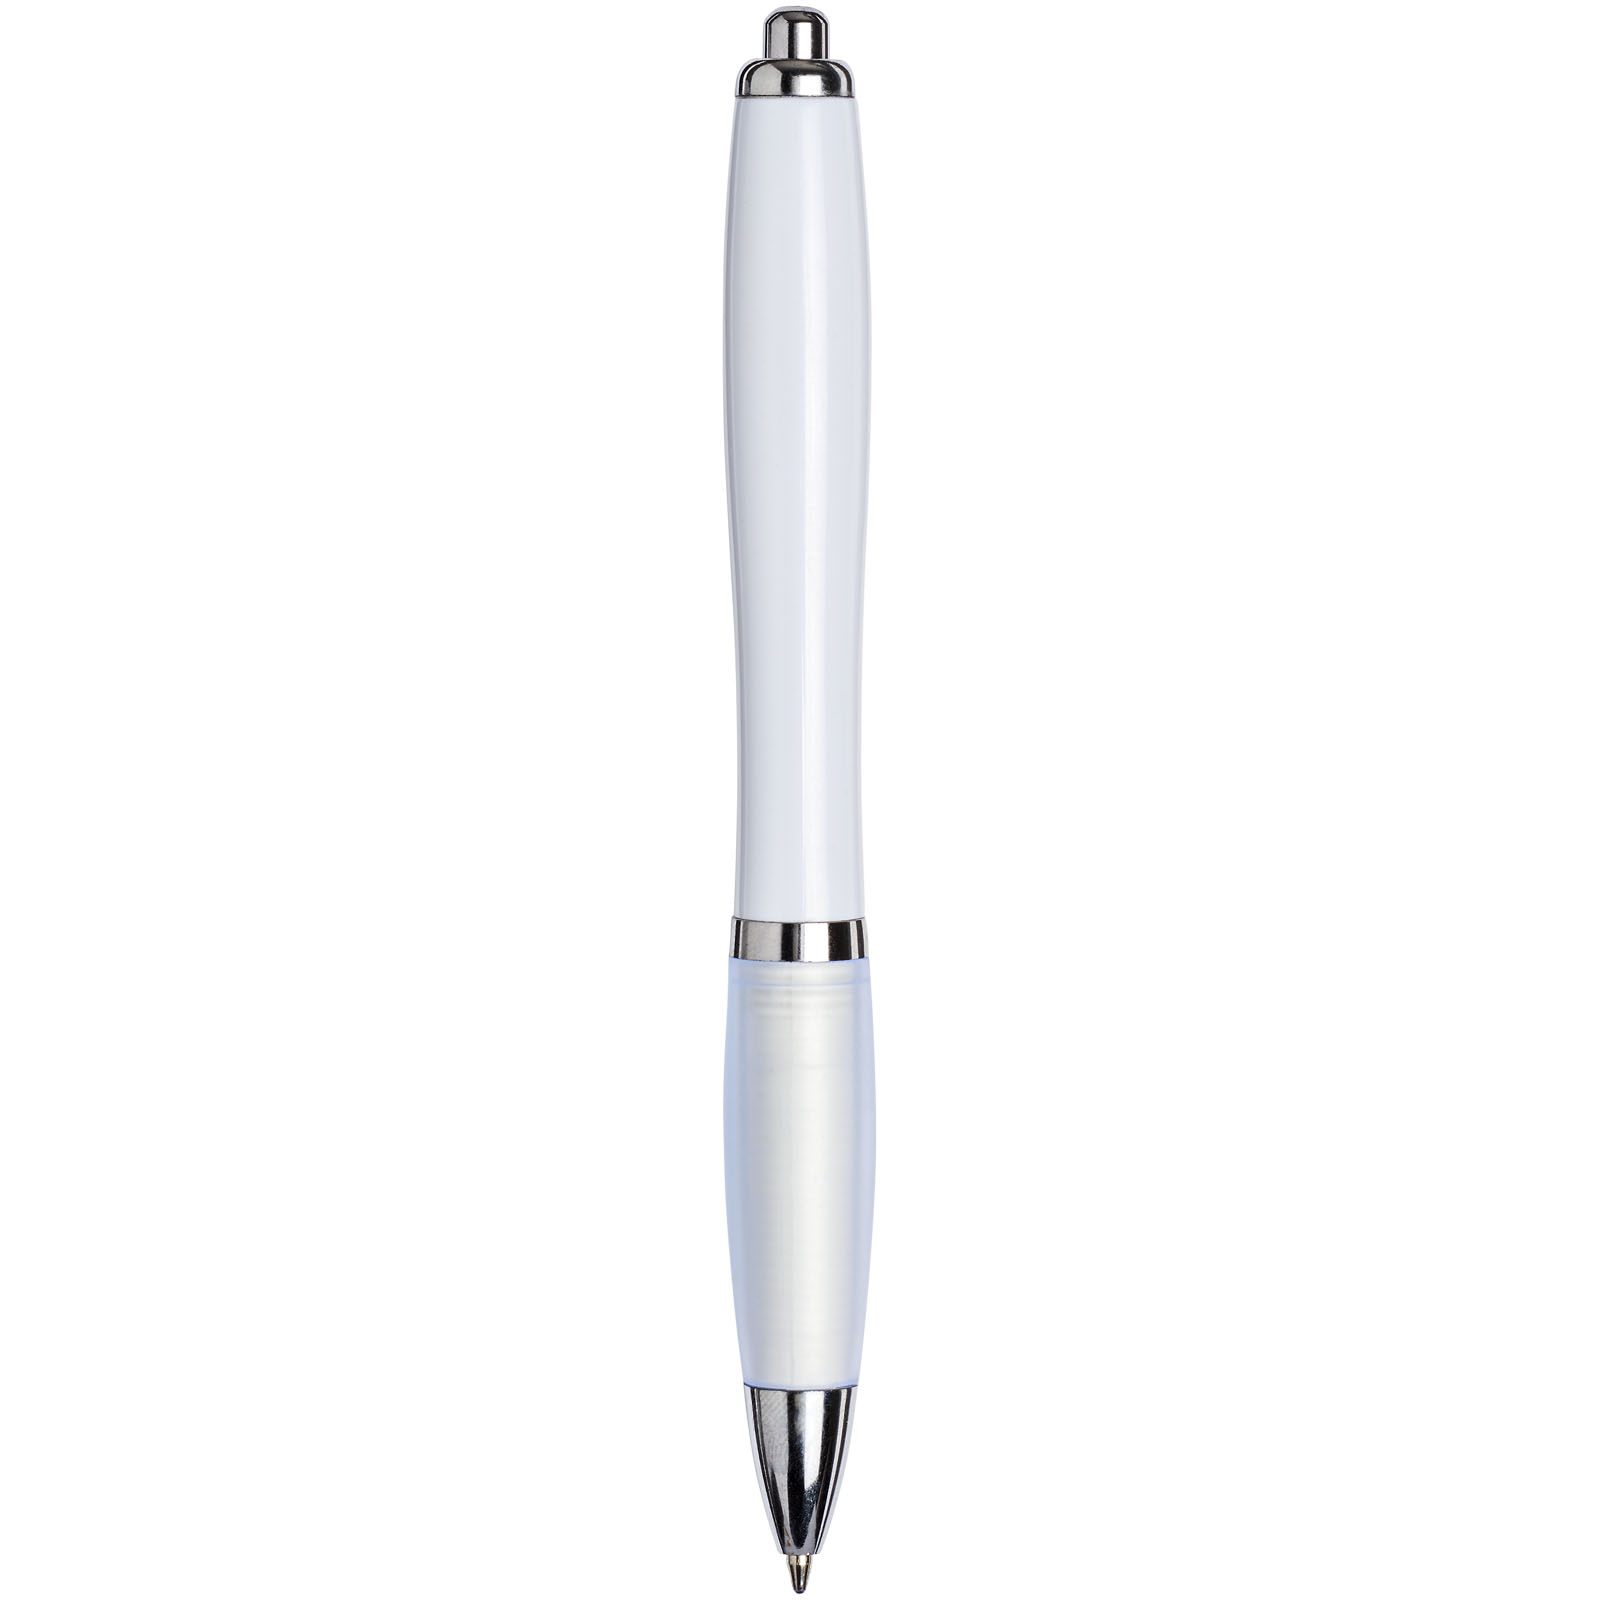 Advertising Ballpoint Pens - Nash ballpoint pen with coloured barrel and grip - 1